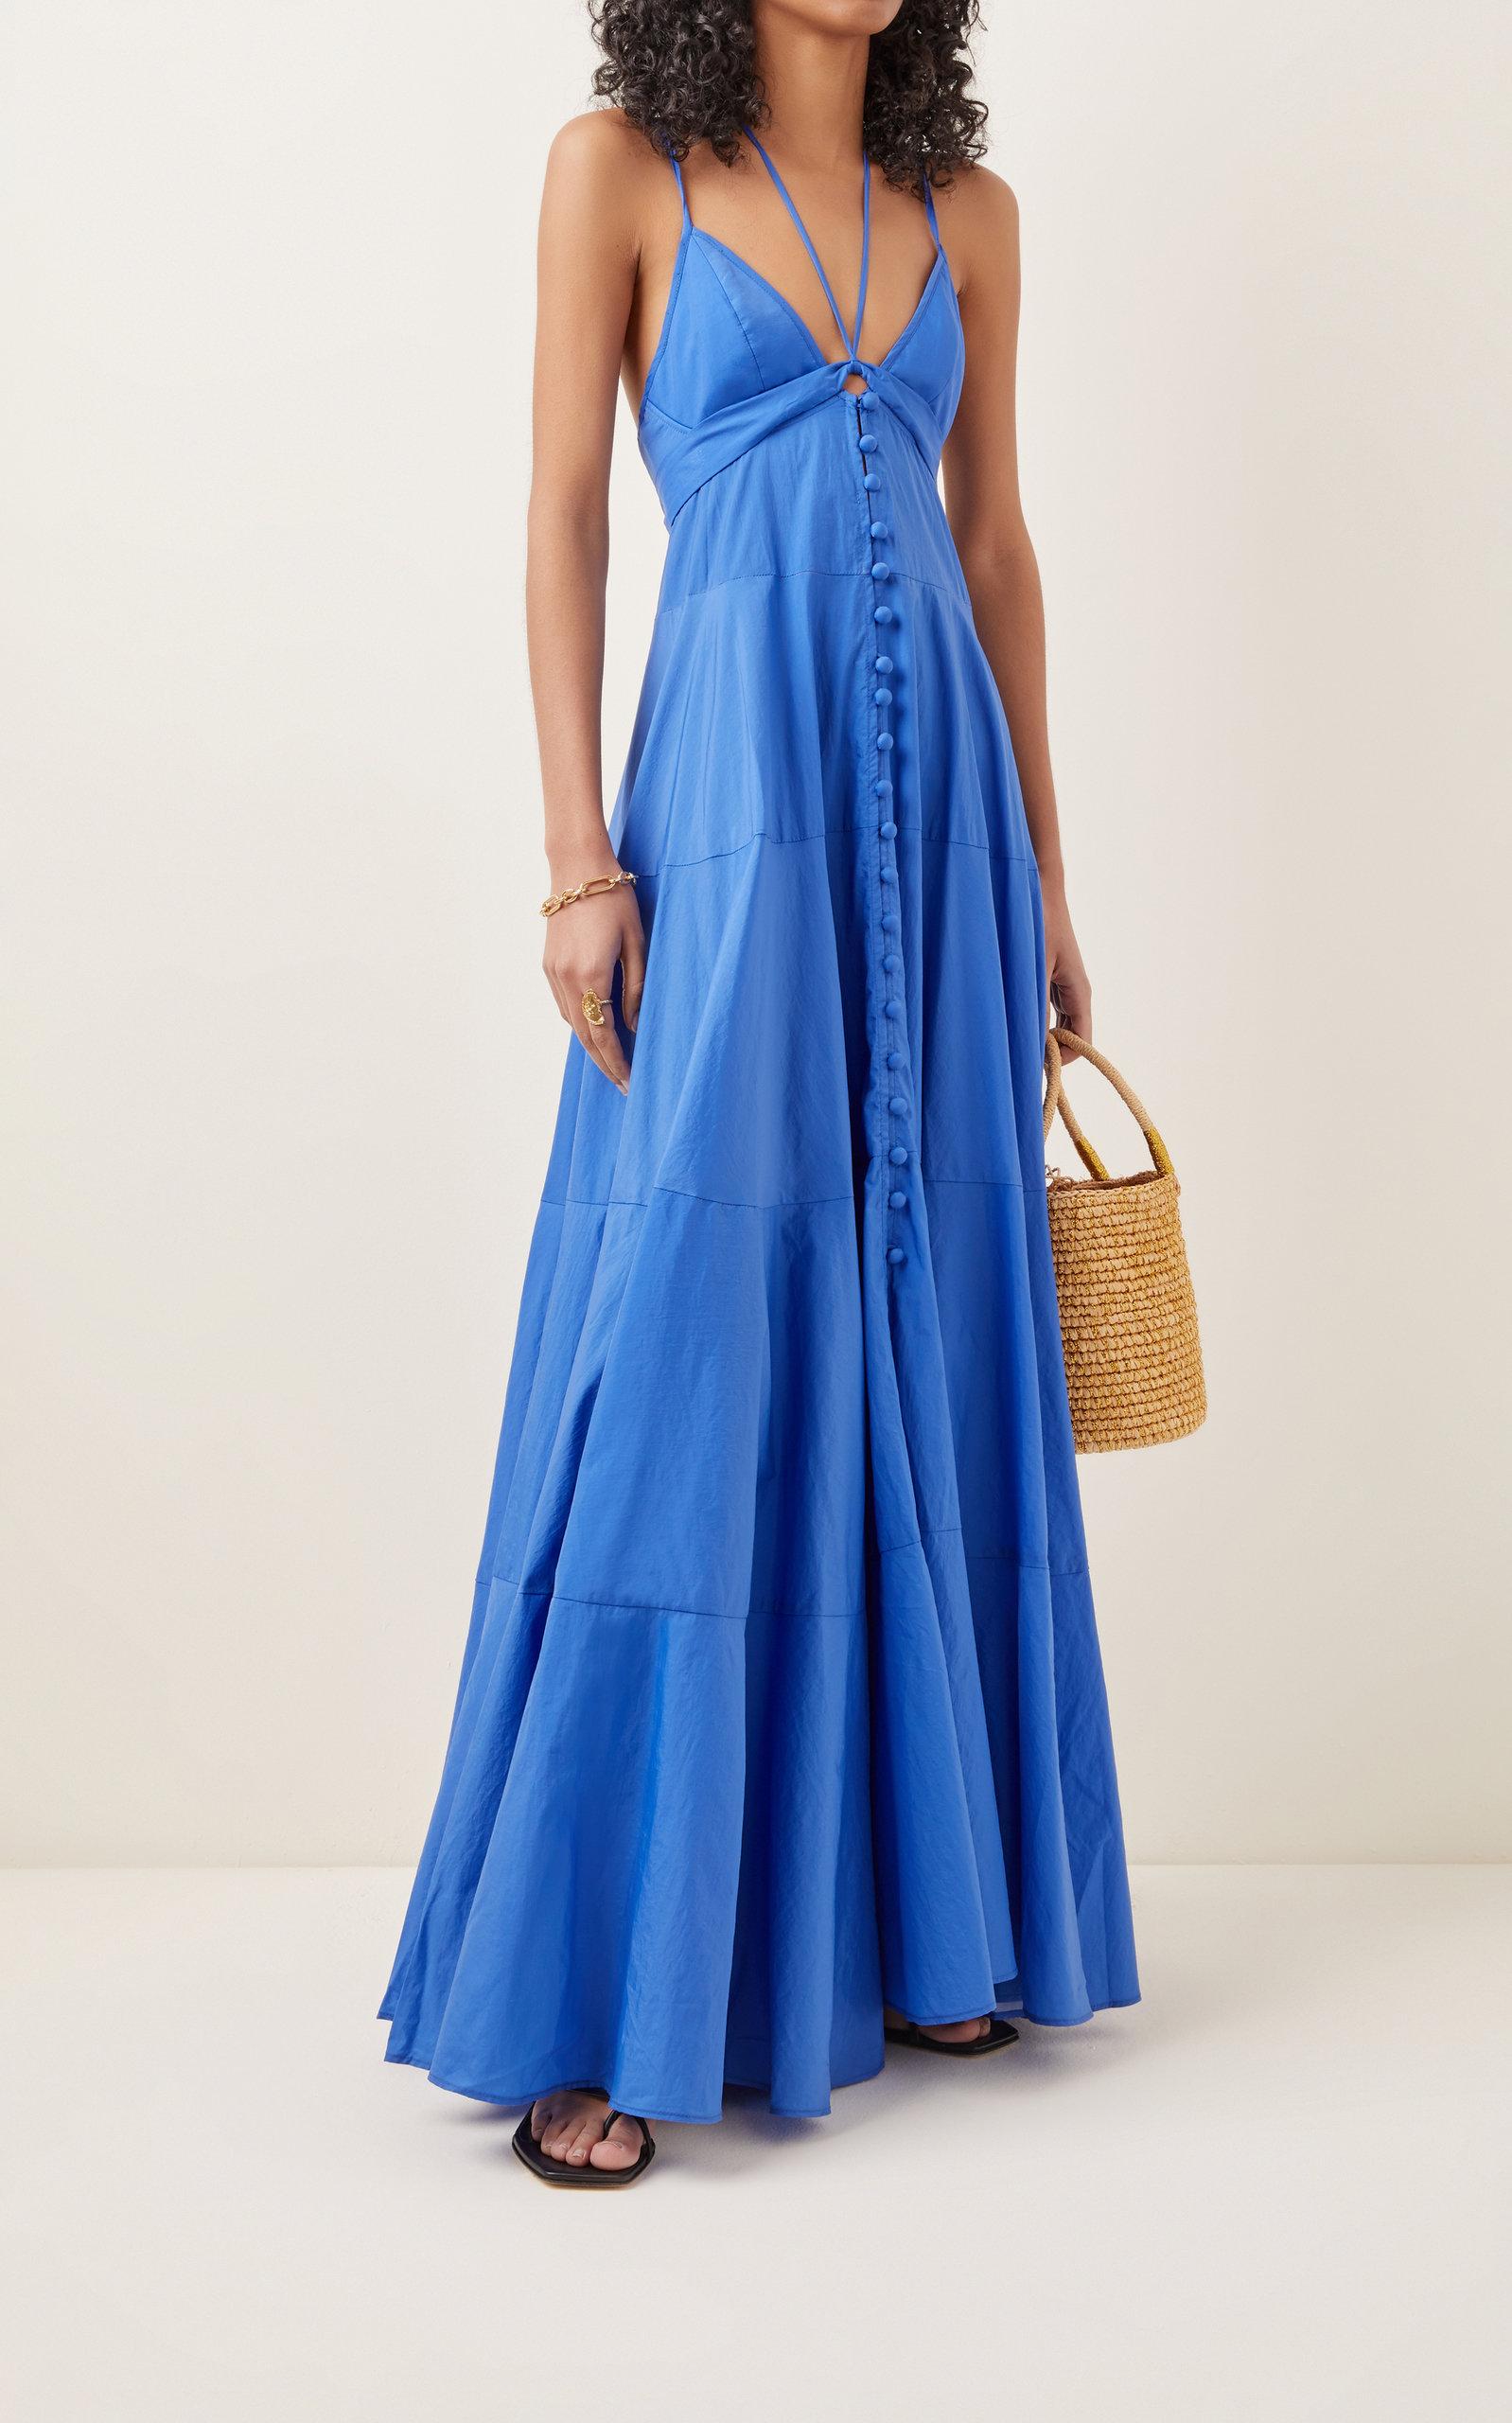 Alexis Sabelle Tiered Maxi Dress in ...